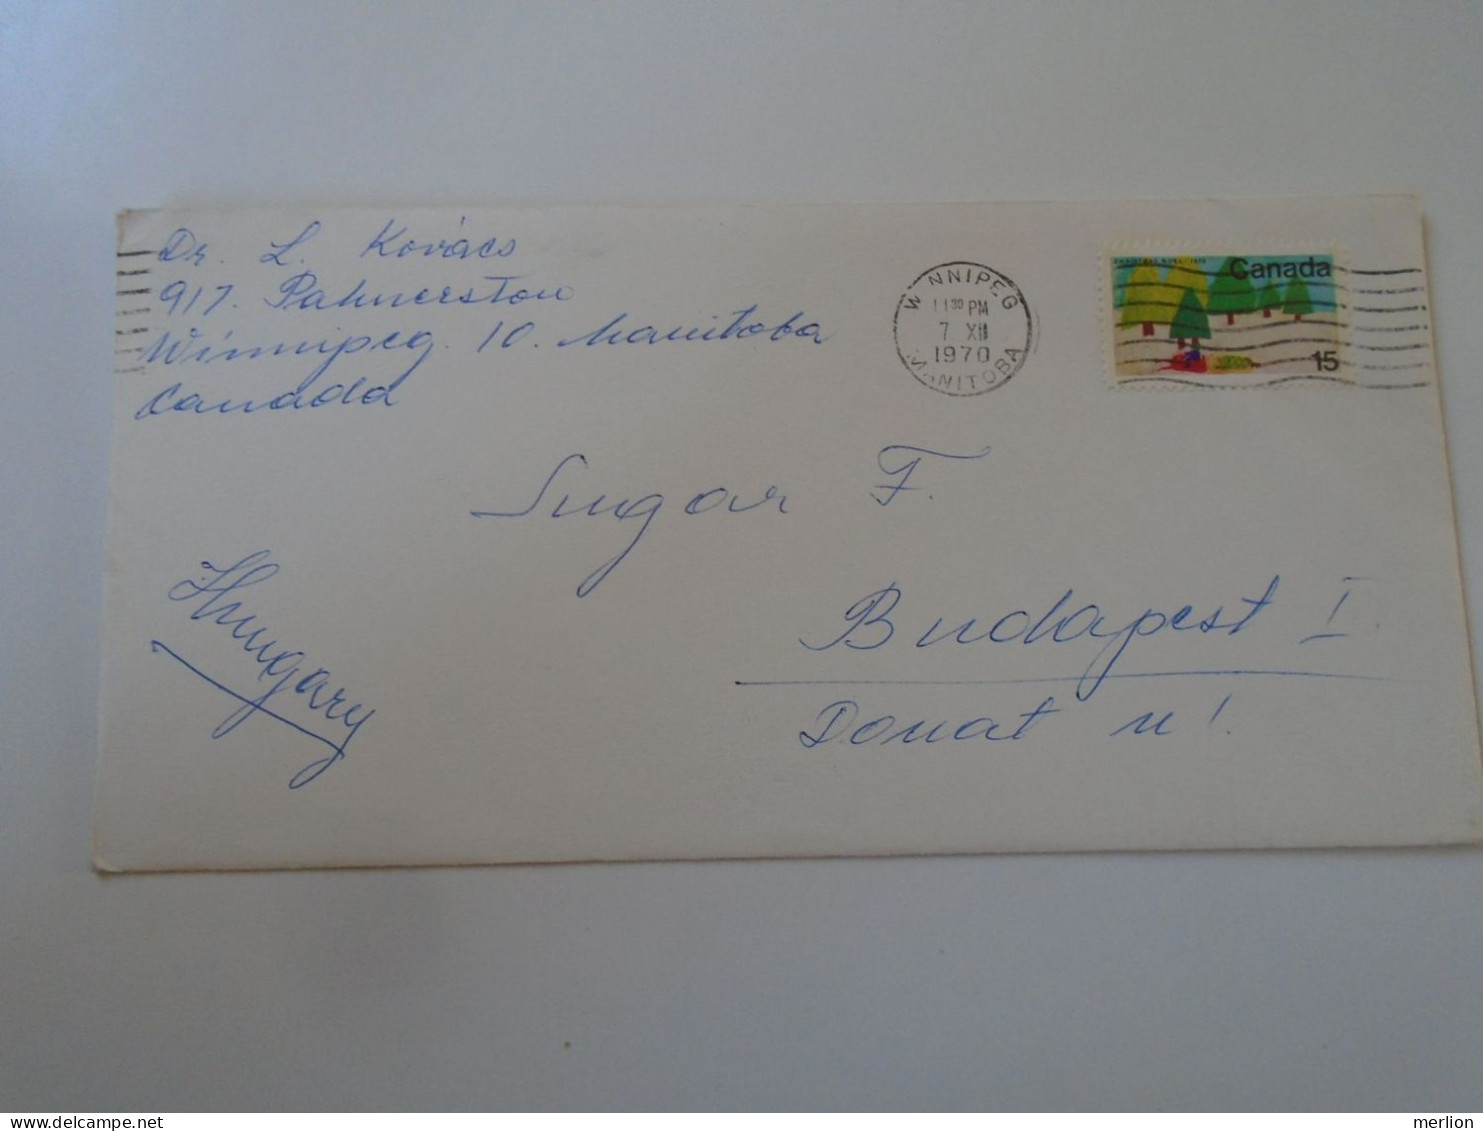 D198163  Canada  Cover  1970 Winnipeg, Manitoba- Stamp  Christmas Noel 1970     Sent To Hungary - Lettres & Documents